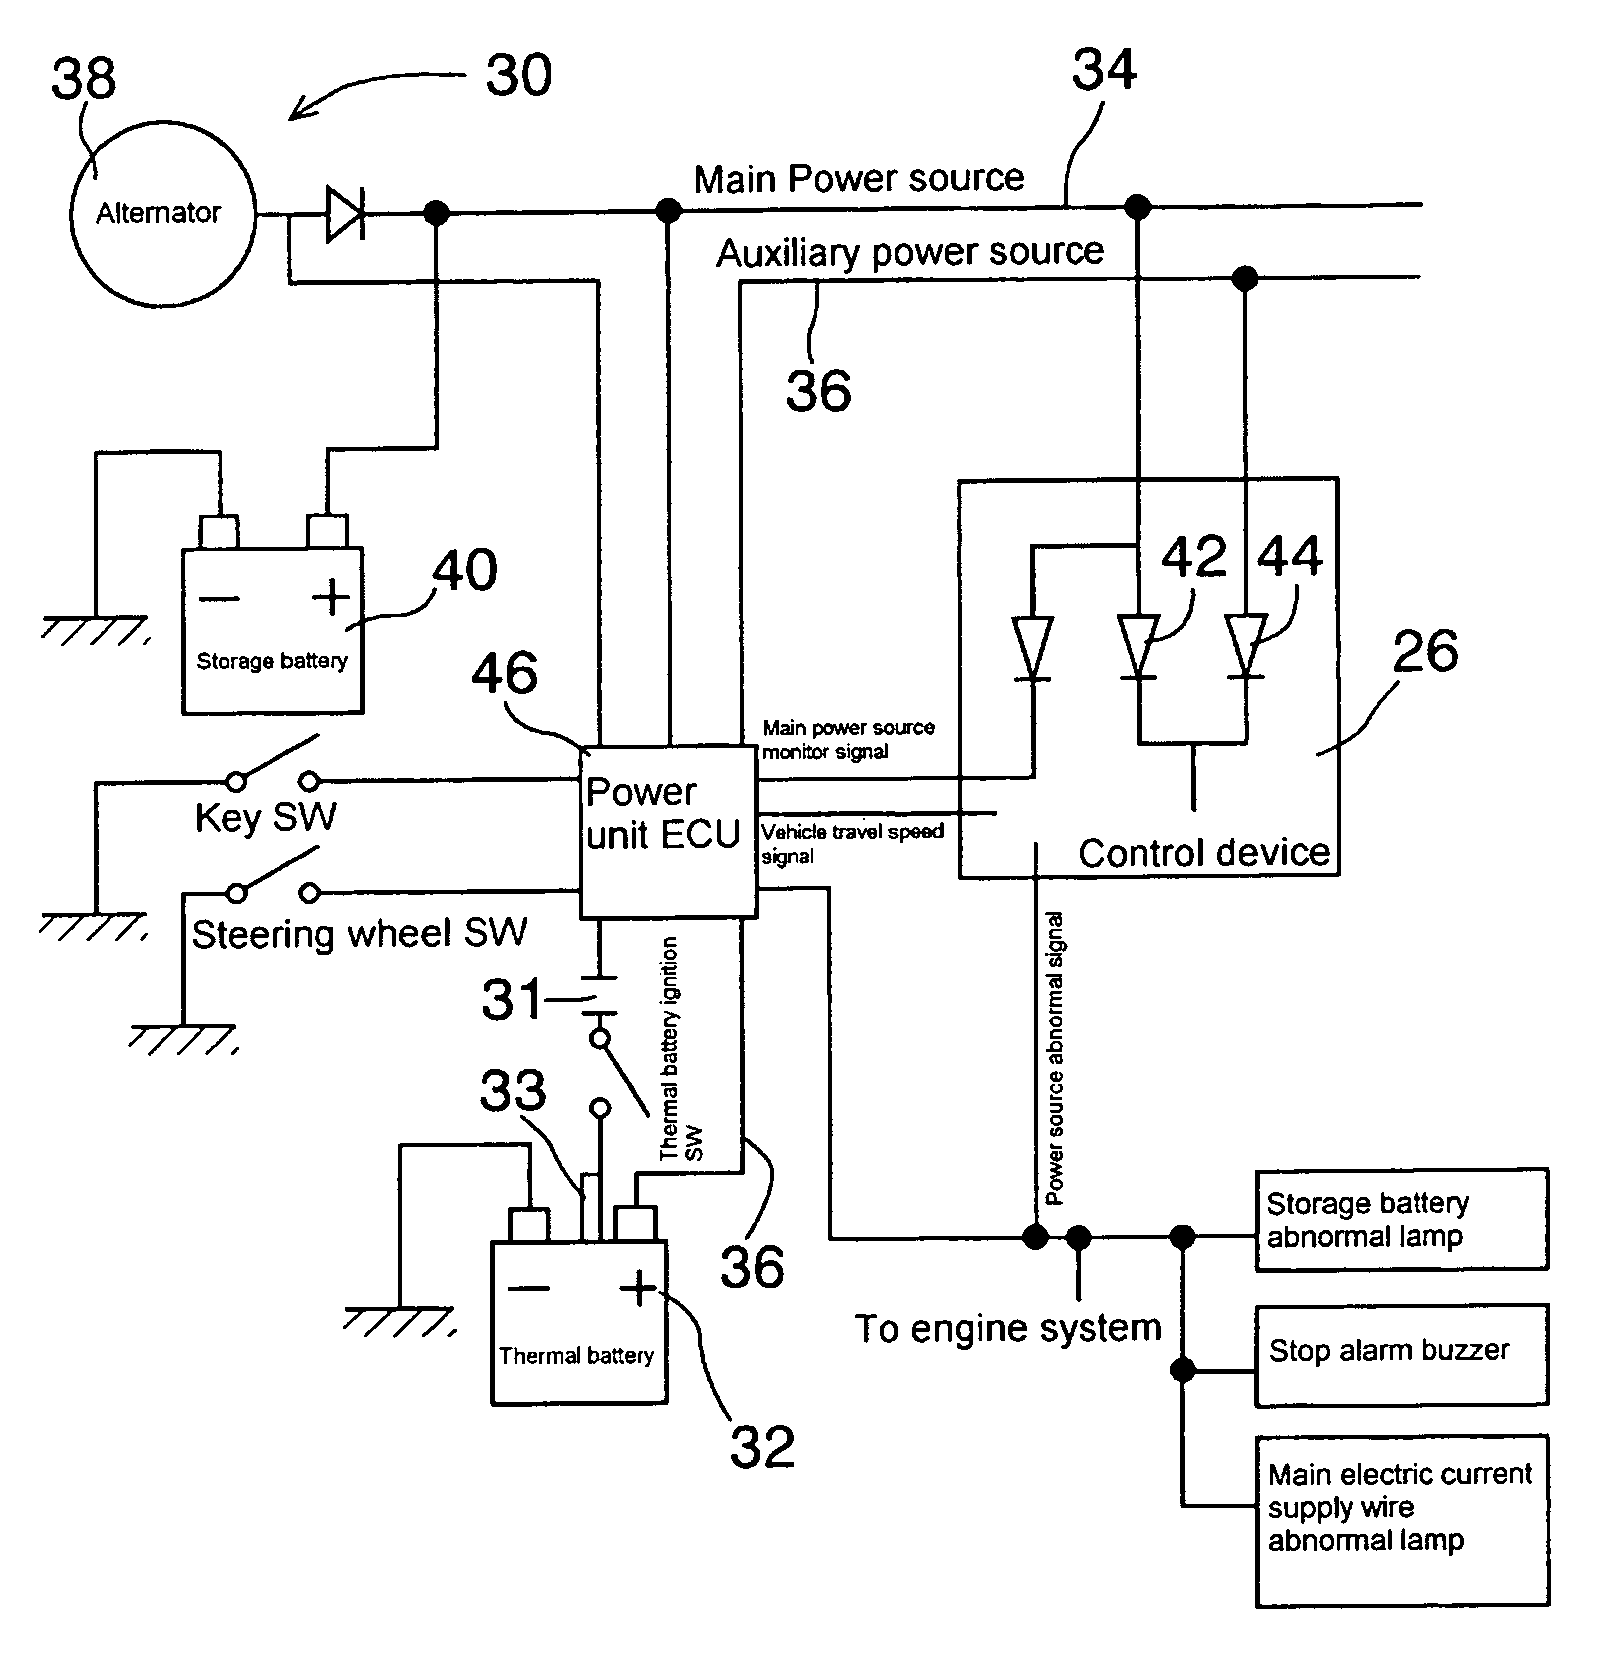 Power unit for conveyance and conveyance provided with the power unit